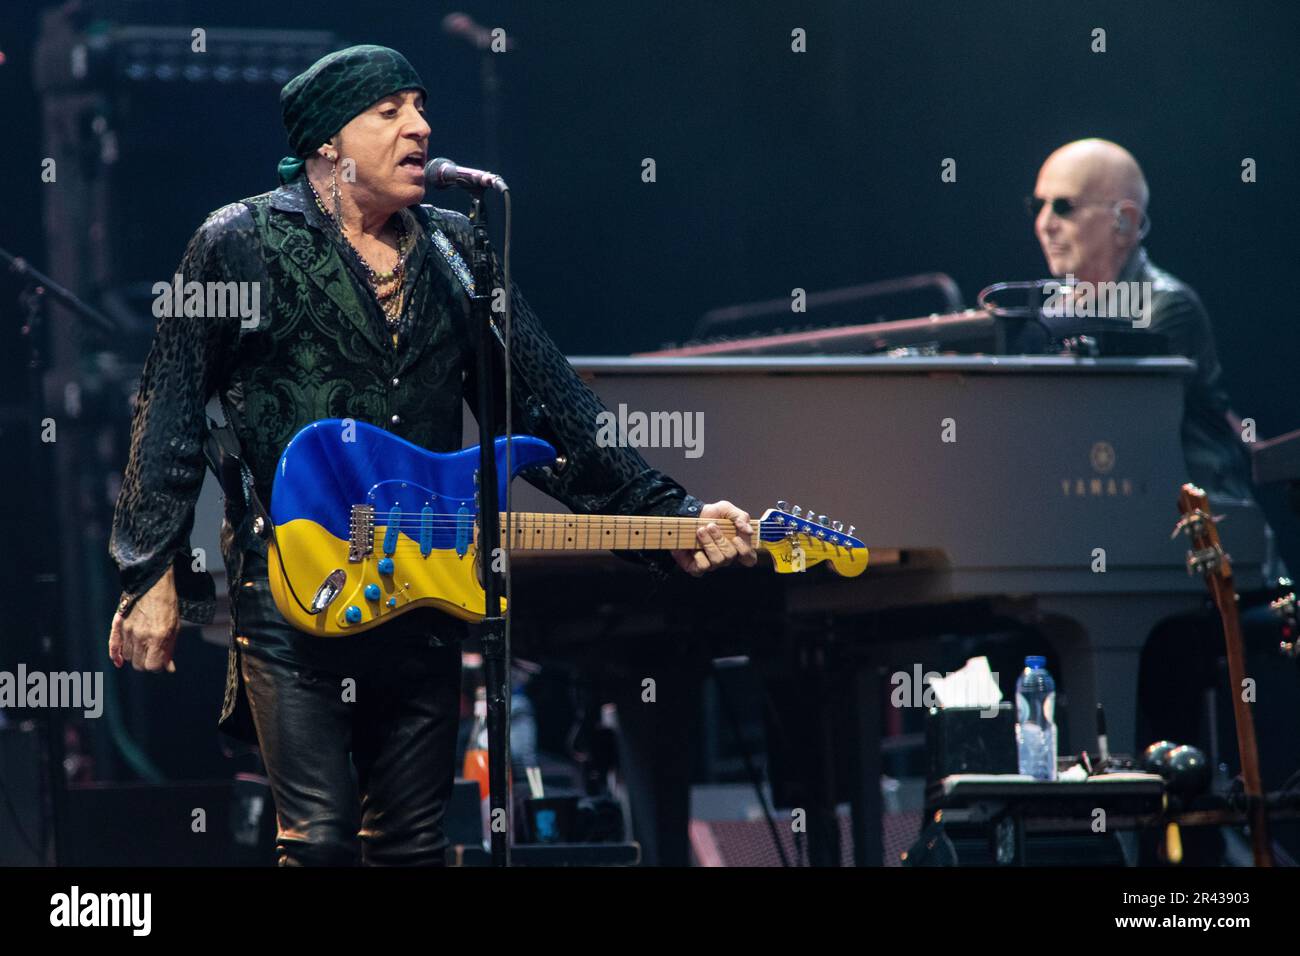 Amsterdam, The Netherlands. May 25, 2023.  Steven Van Zandt performs with Bruce Springsteen and The E Street Band in the Johan Cruijff ArenA during a European stadium tour The Boss. ANP PAUL BERGEN netherlands out - belgium out/Alamy Live News Stock Photo